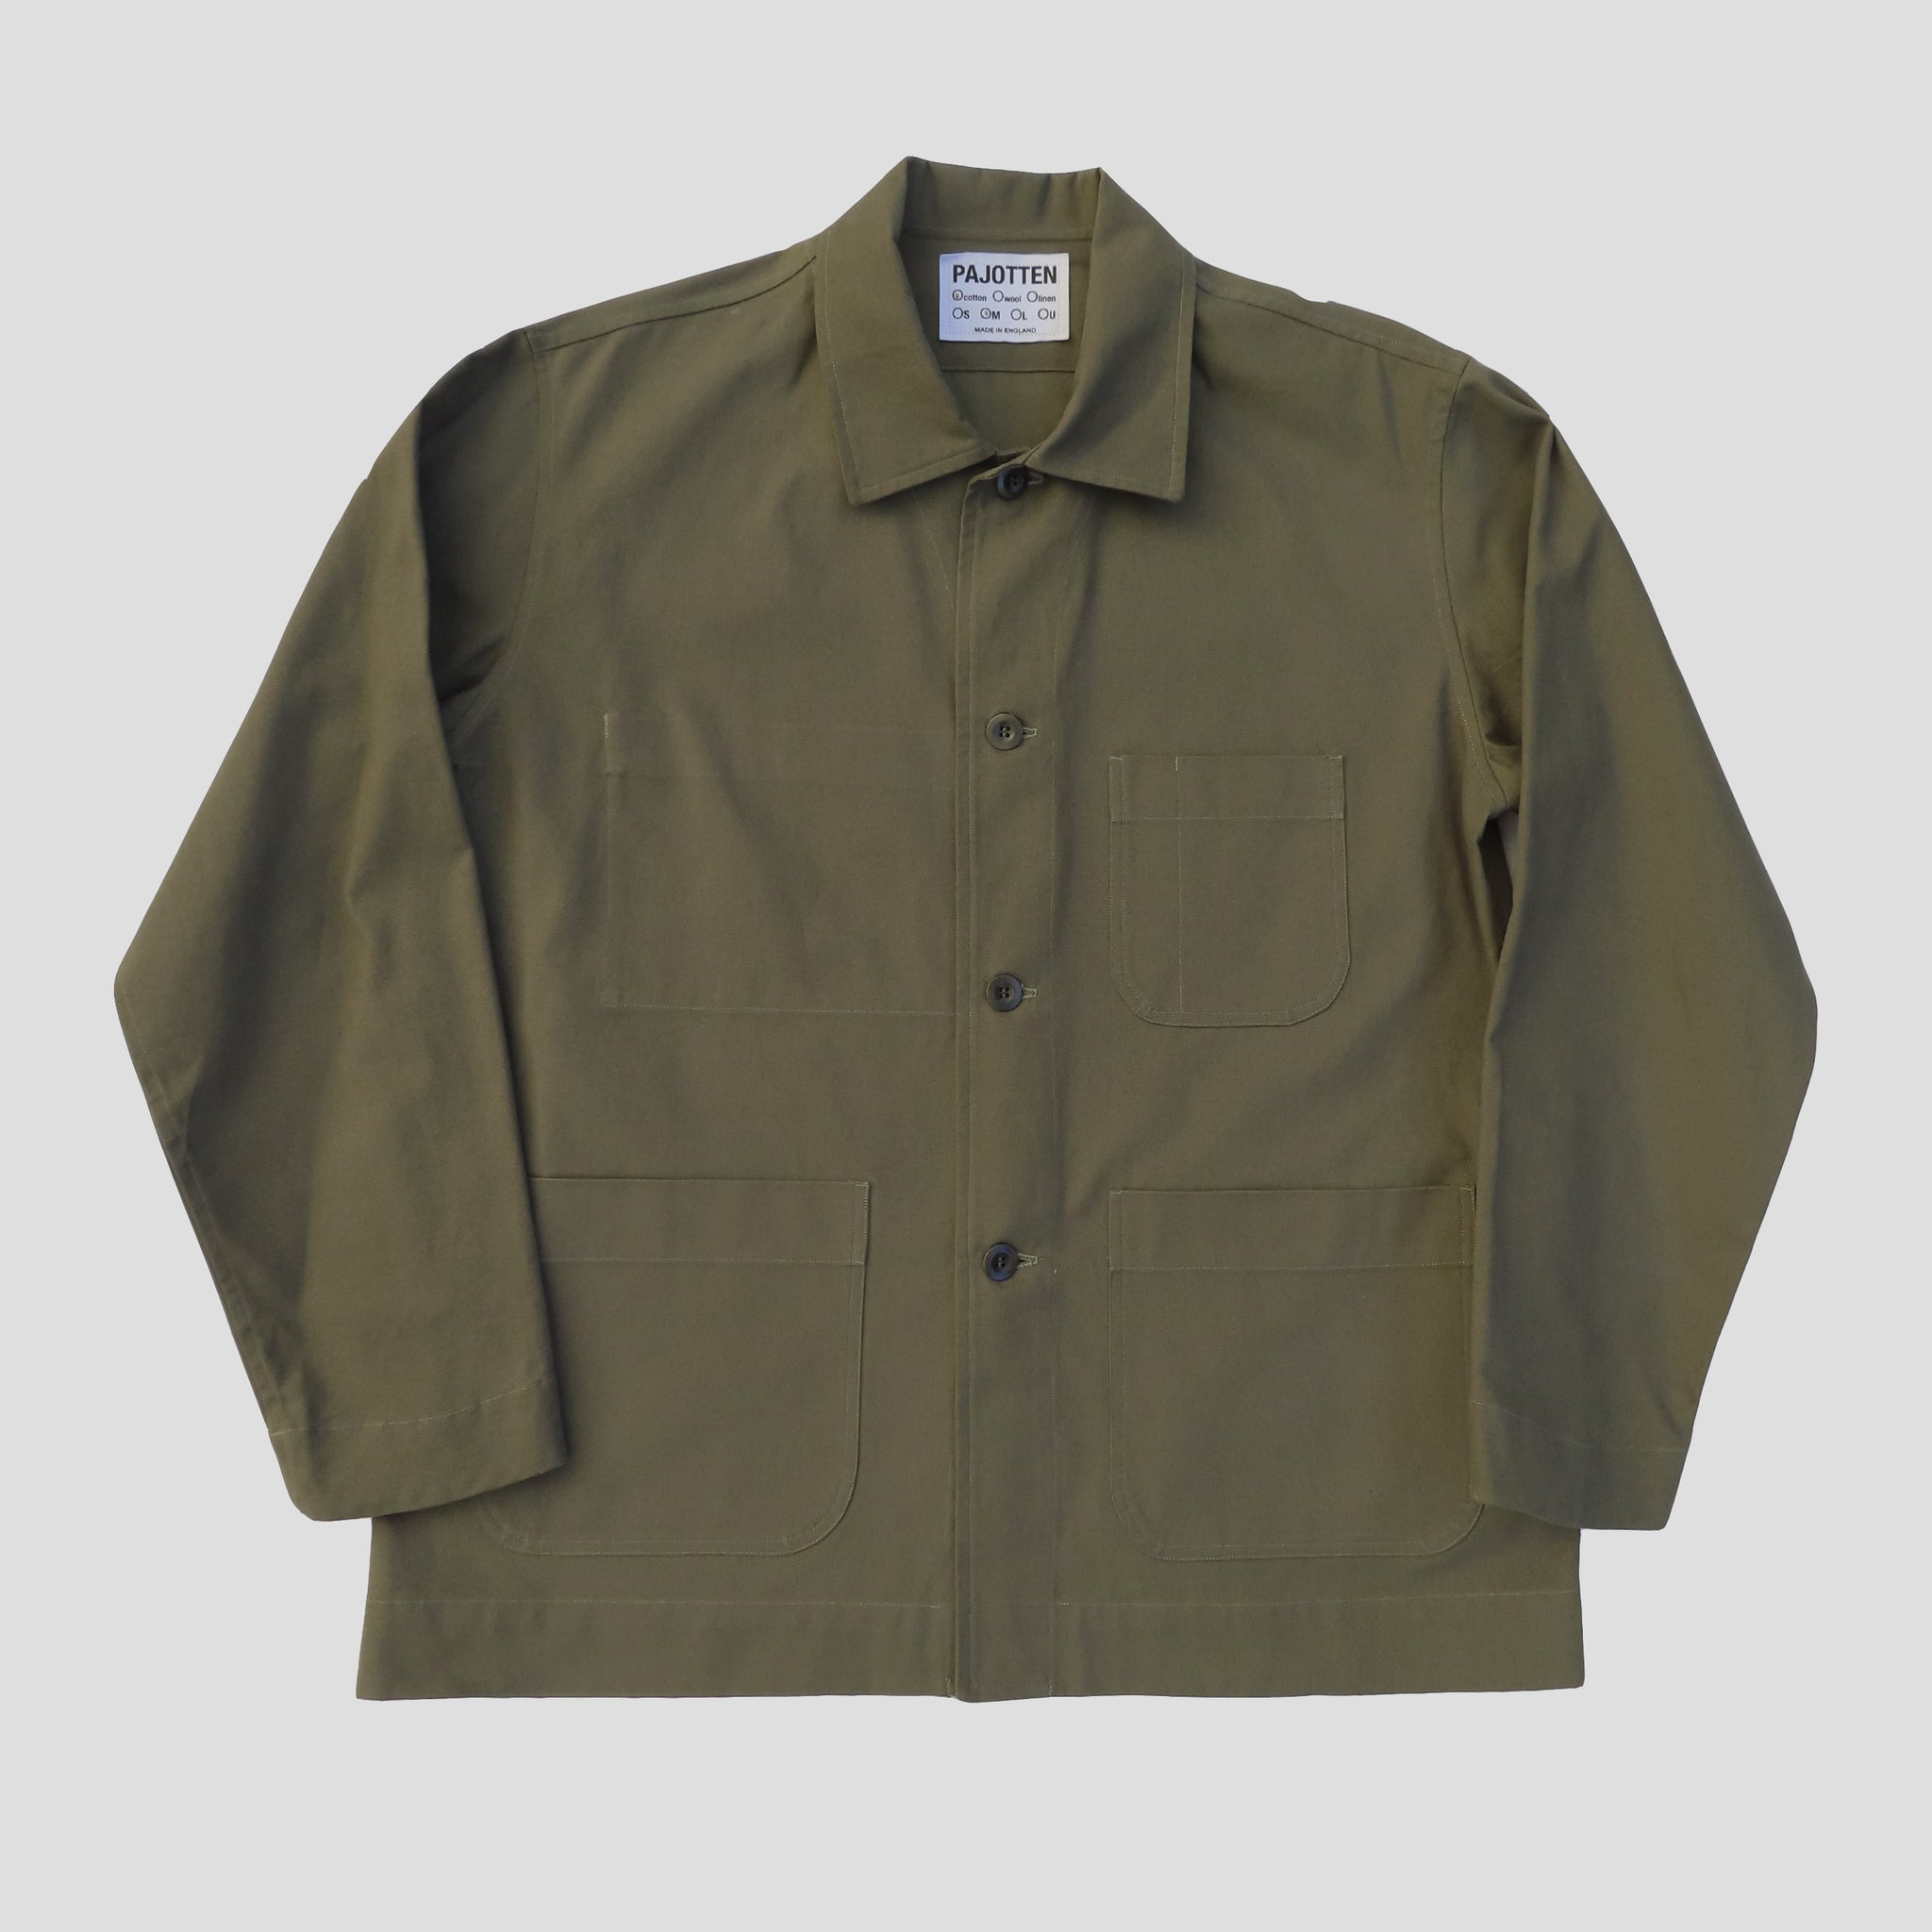 front view of a mens sage green traditional chore jacket with three outer pockets made sustainably in the UK